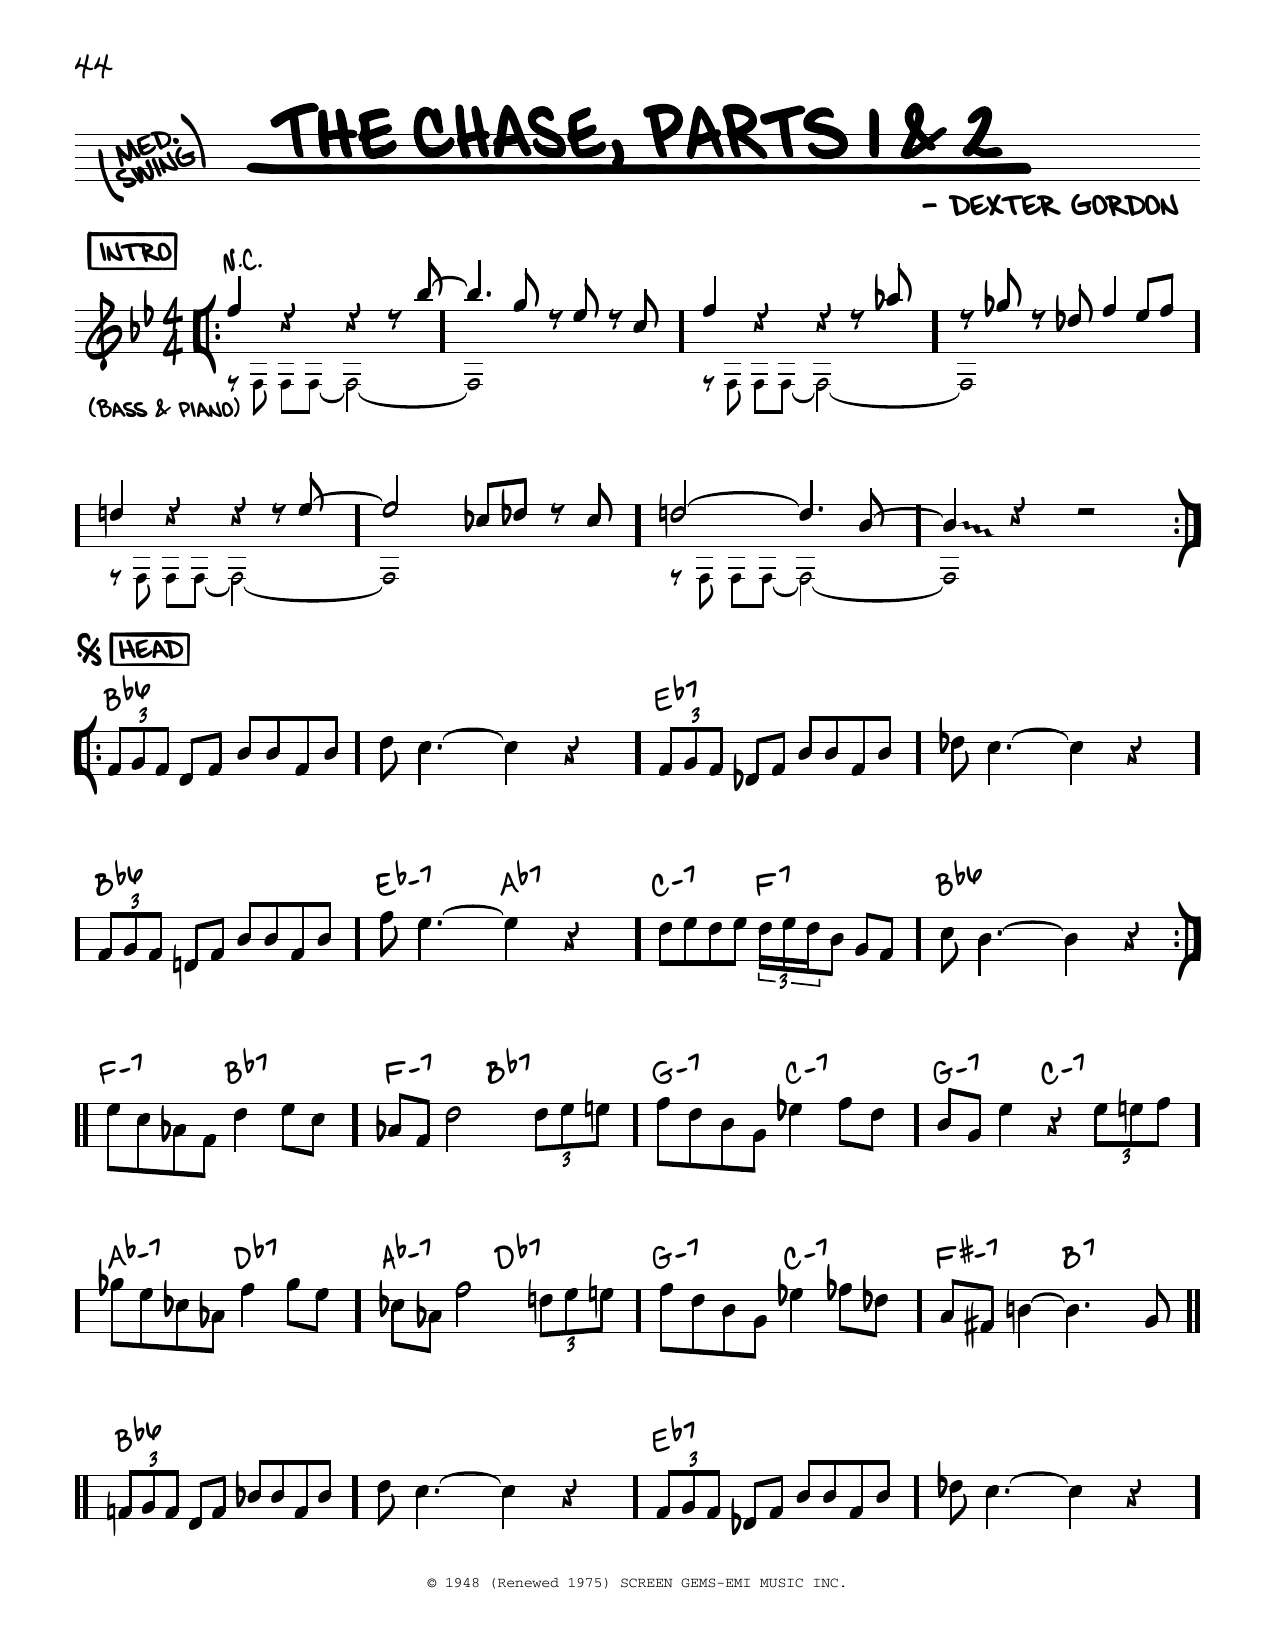 Download Dexter Gordon The Chase, Parts 1 & 2 Sheet Music